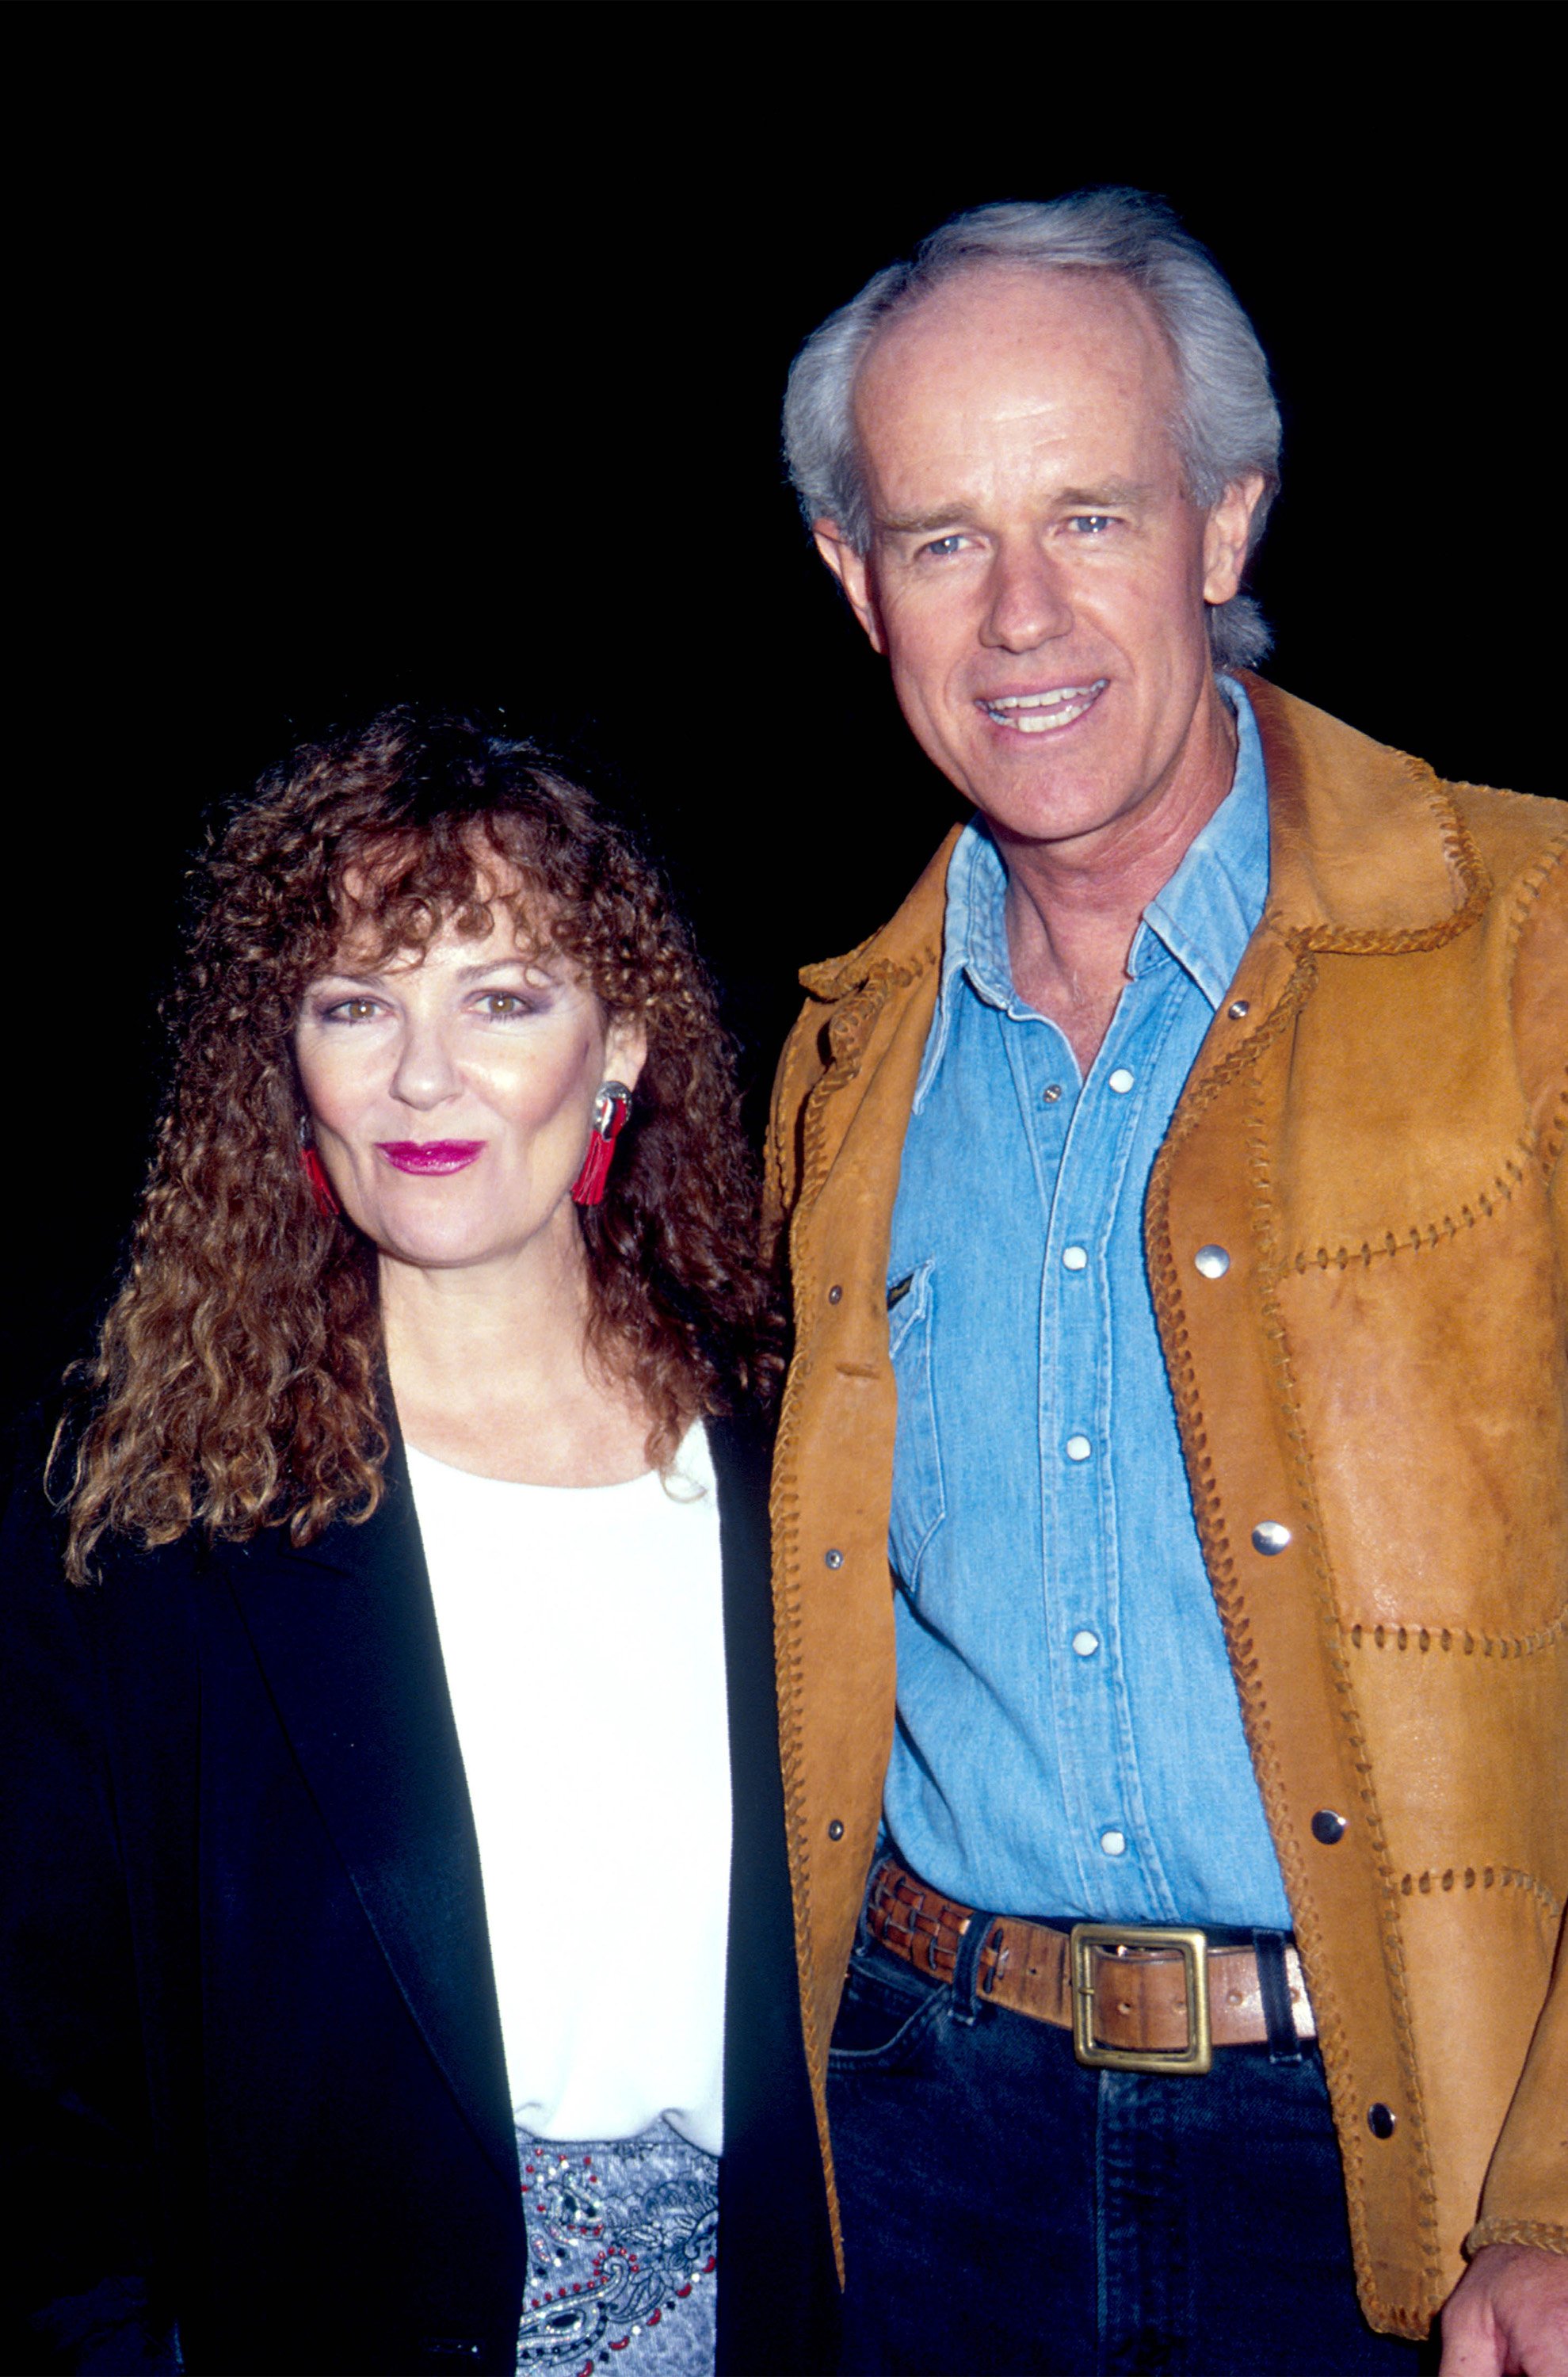 Shelley Fabares and Mike Farrell attend the Scott Newman Foundation Event on August 17, 1991 in Los Angeles, California ┃Source: Getty Images